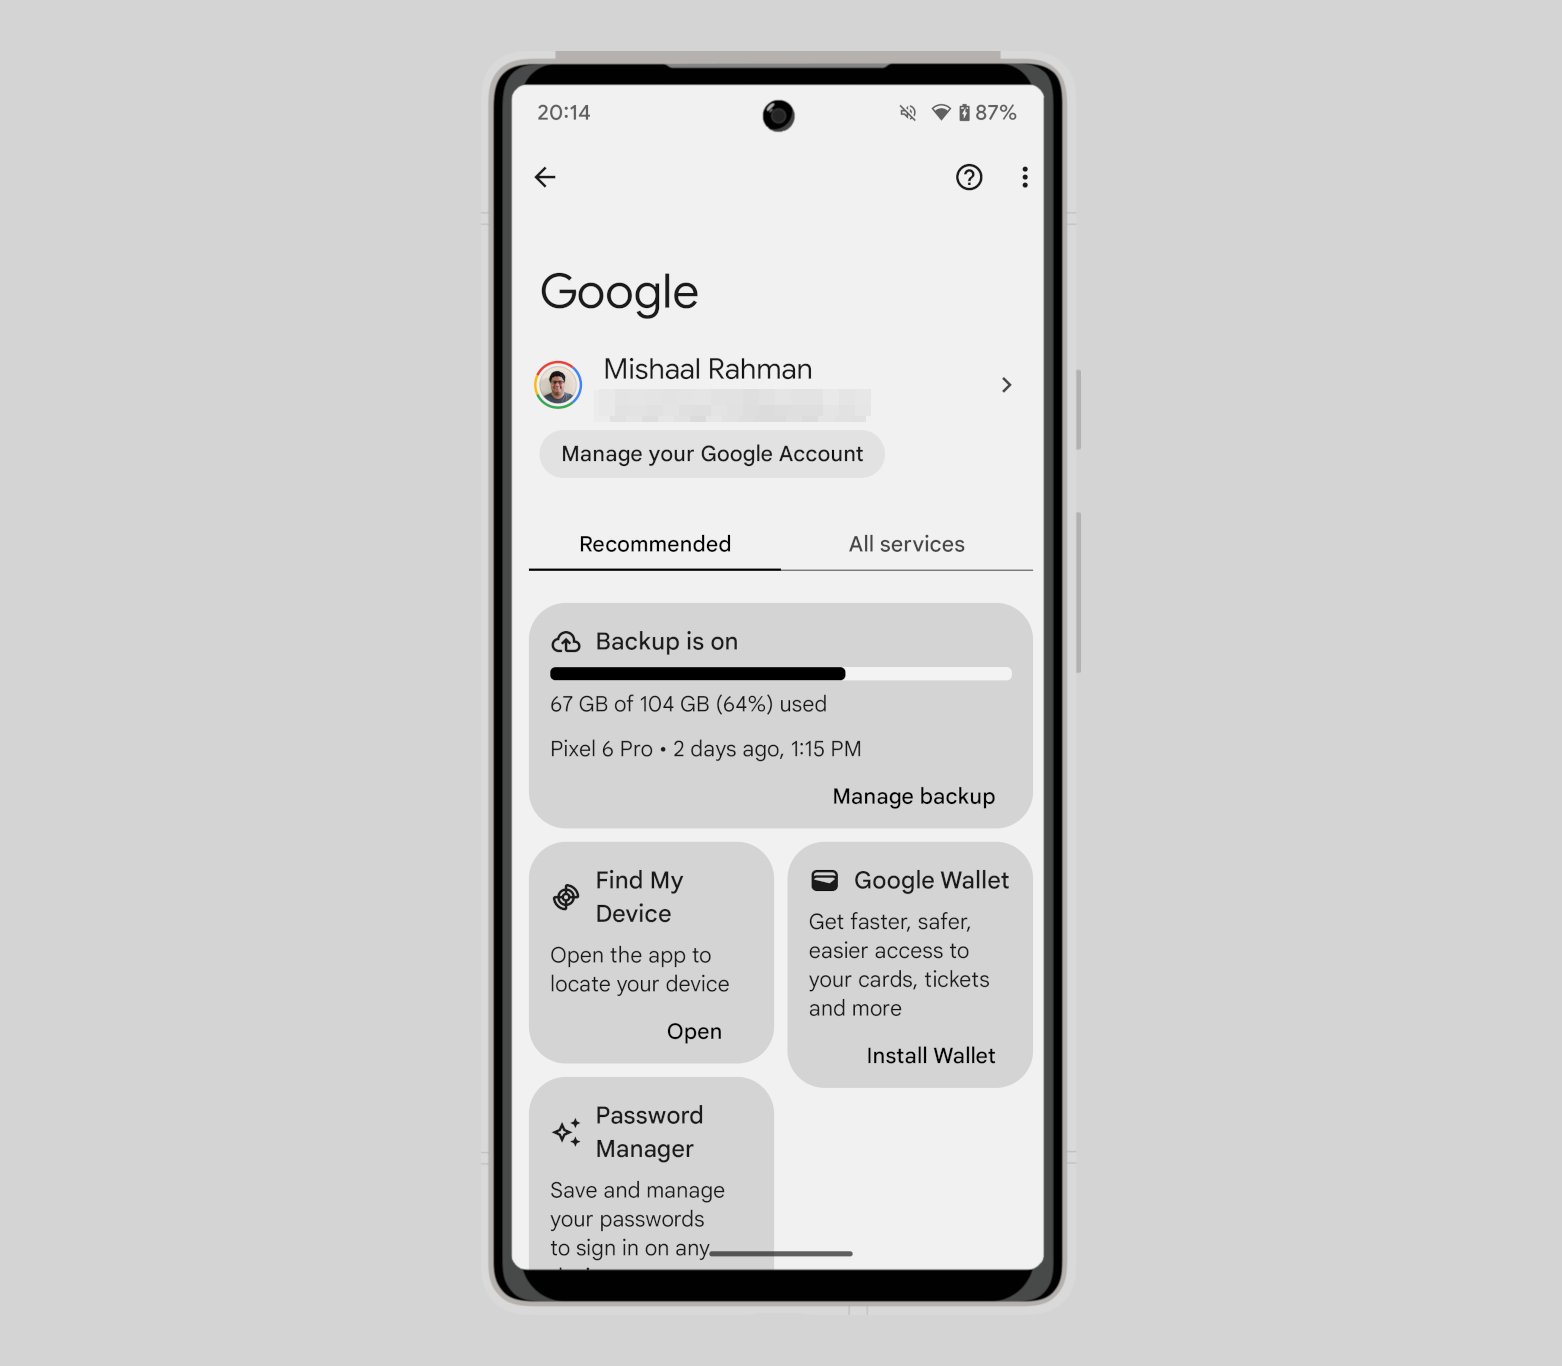 Mishaal Rahman on X: Google touts the ability to use your phone